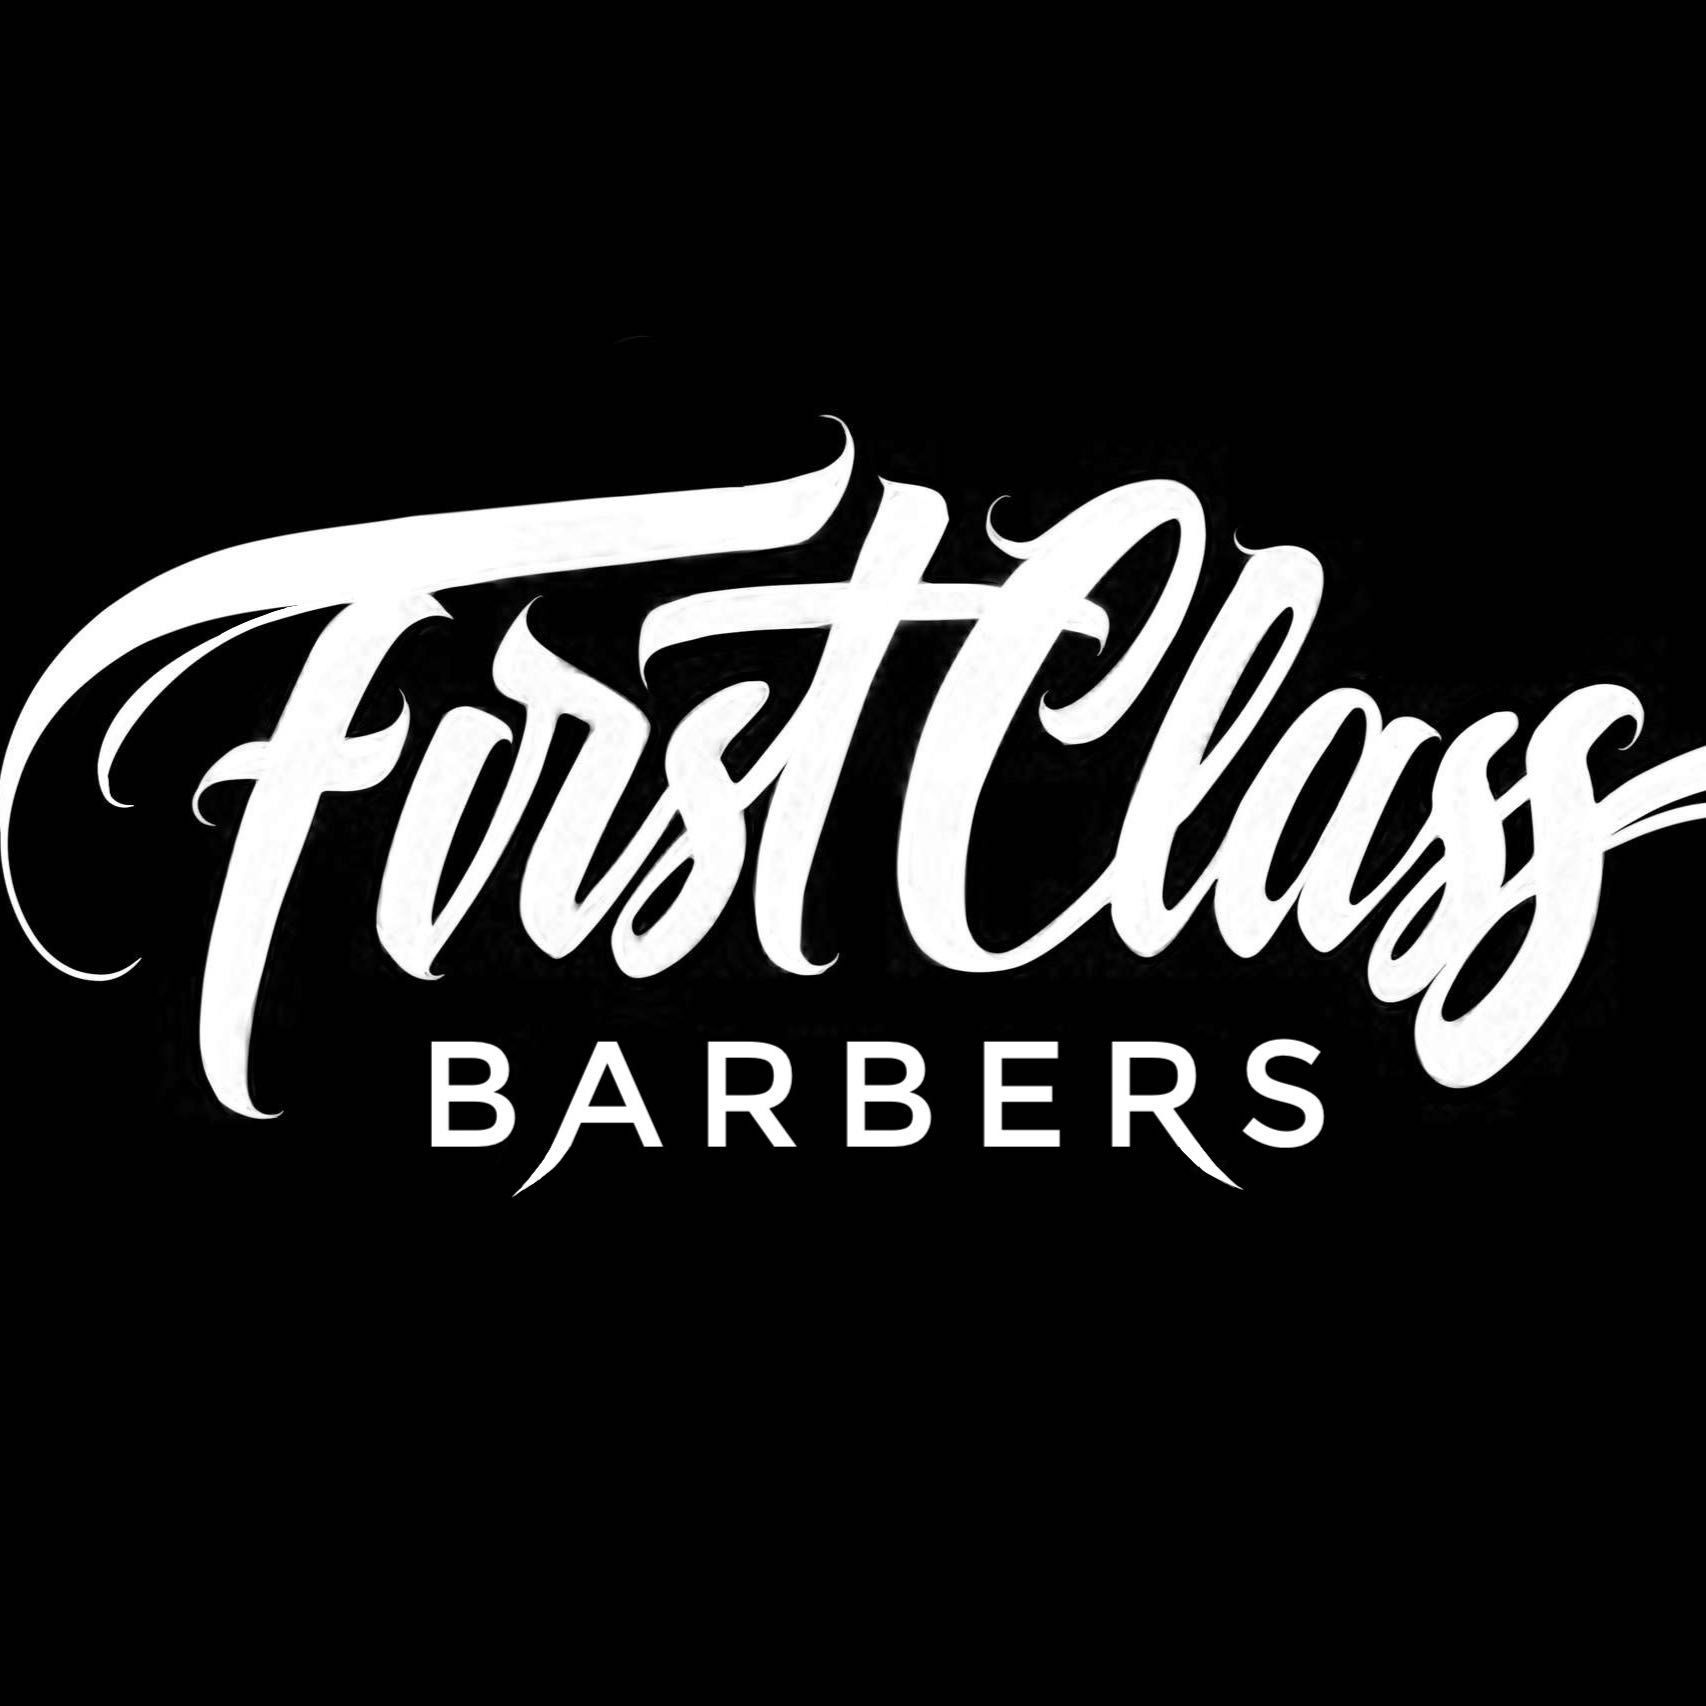 FIRST CLASS BARBERS, 9215 south 700 east, 2/B, Sandy, 84070